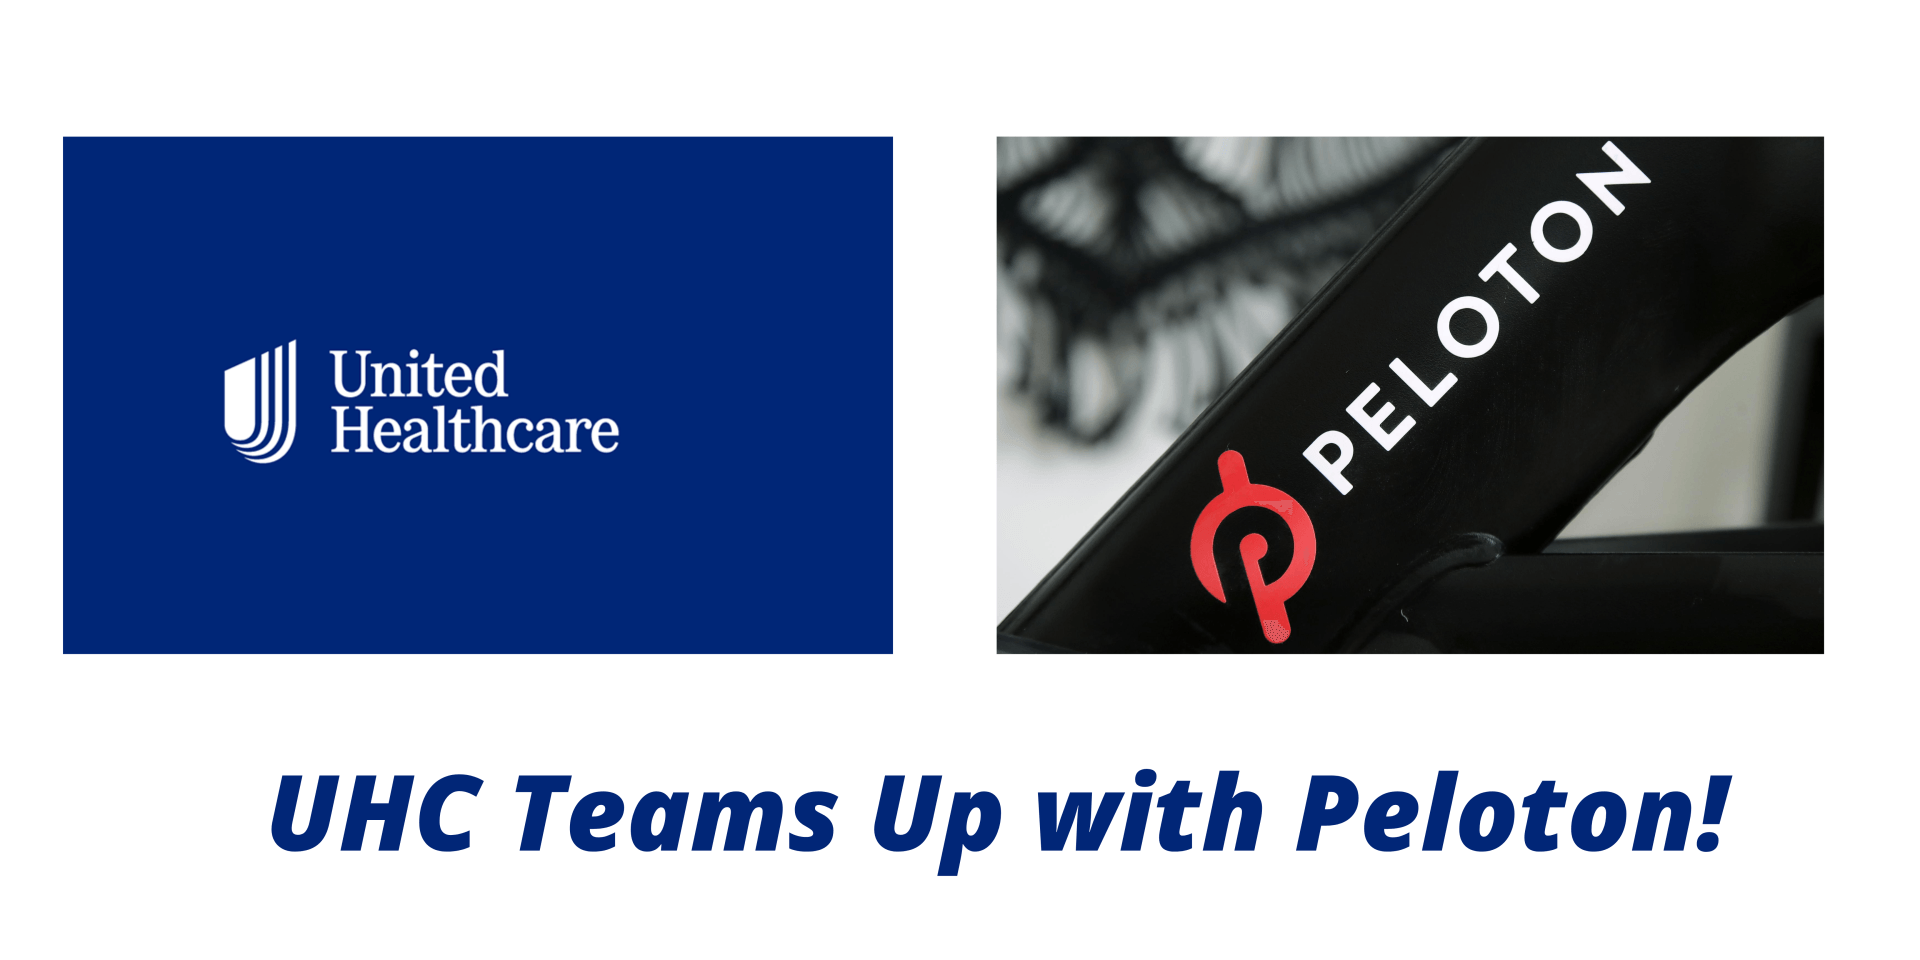 UHC Teams Up with Peloton